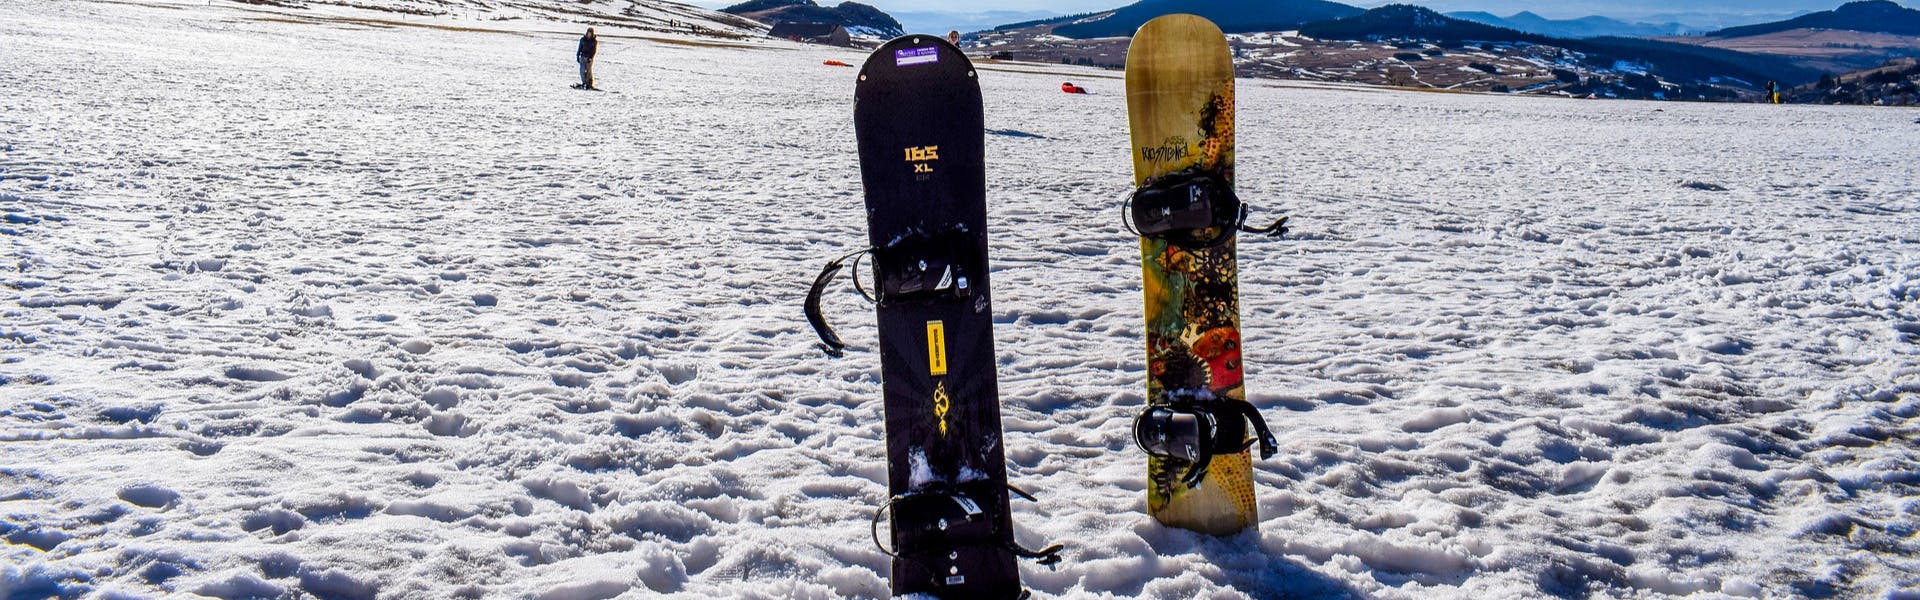 Two snowboards sticking up in the snow. 